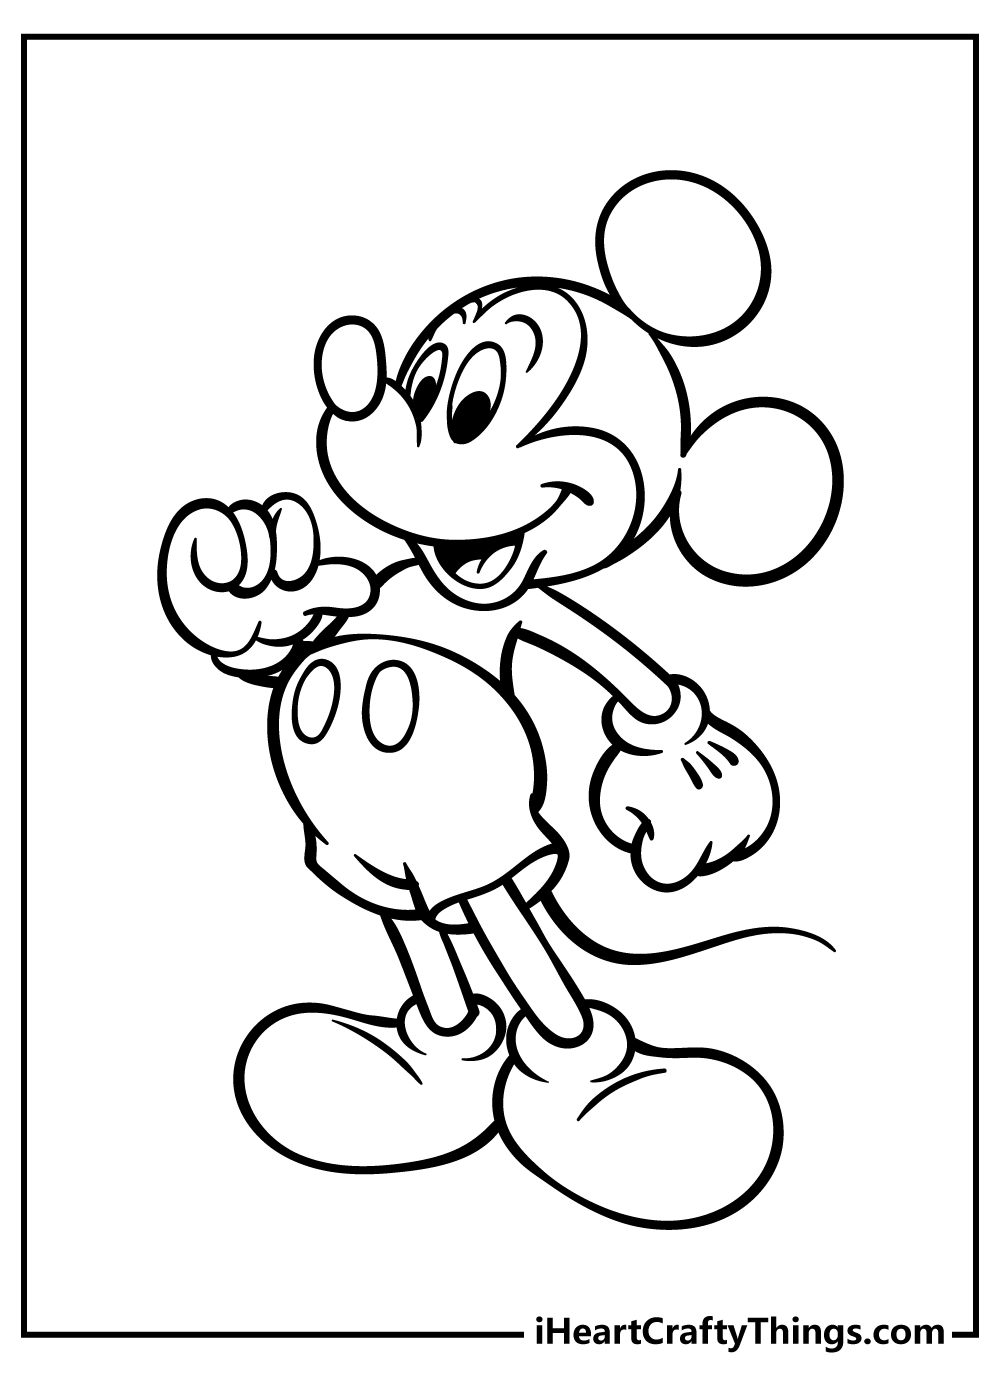 Mickey Mouse Coloring Original Sheet for children free download